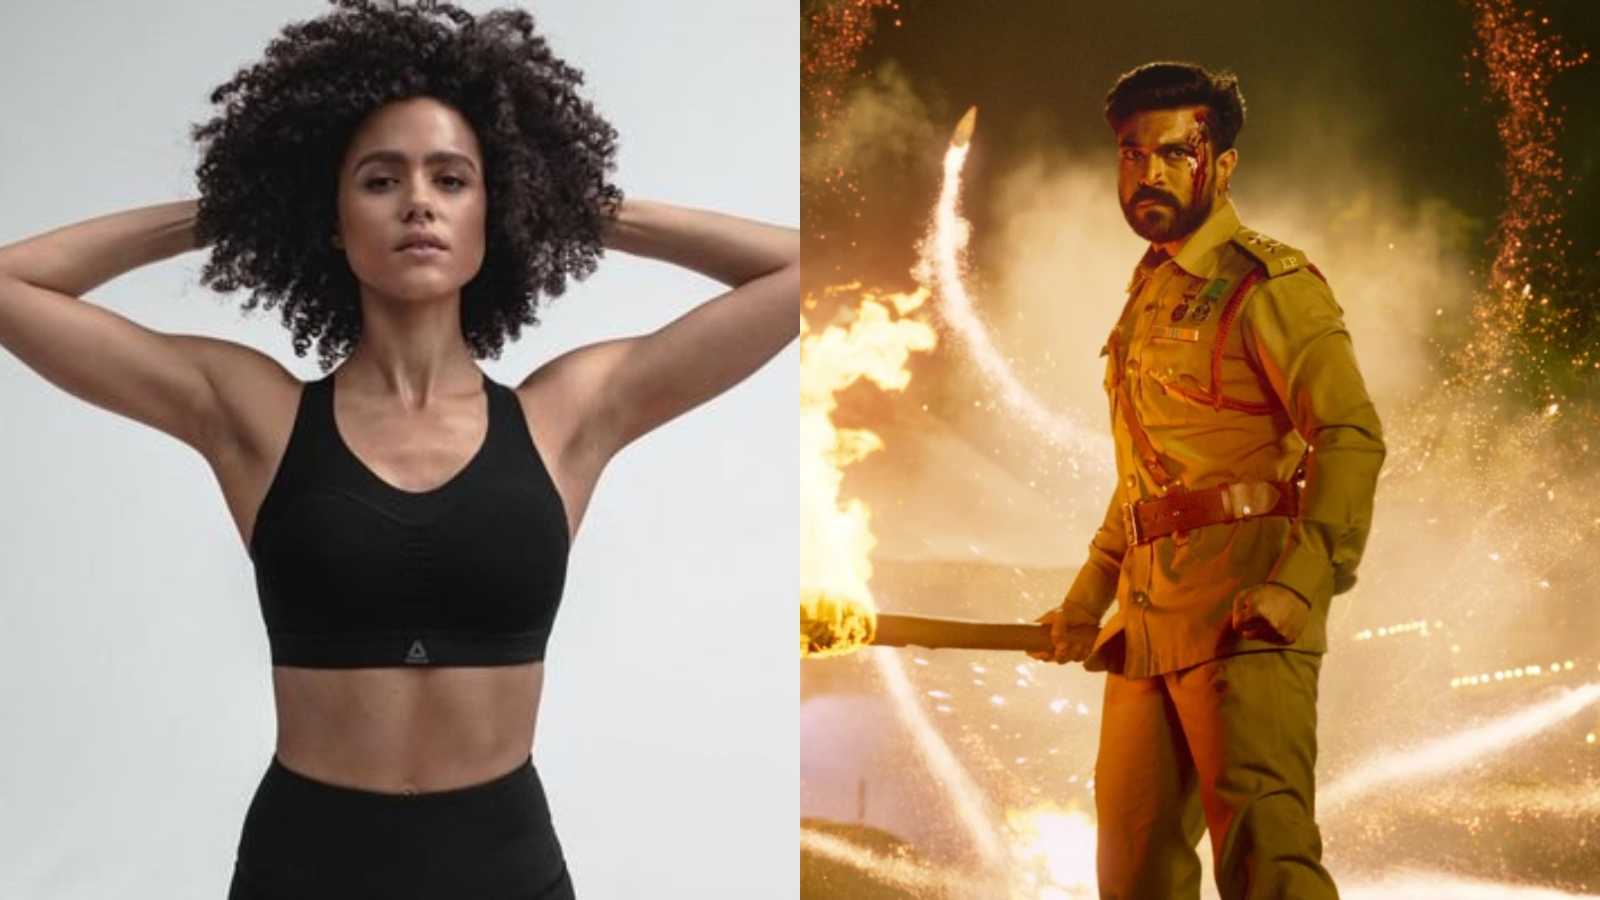 Nathalie Emmanuel thinks Rajamouli's RRR is 'sick', shares an explainer as she goes on a Twitter rant about the film